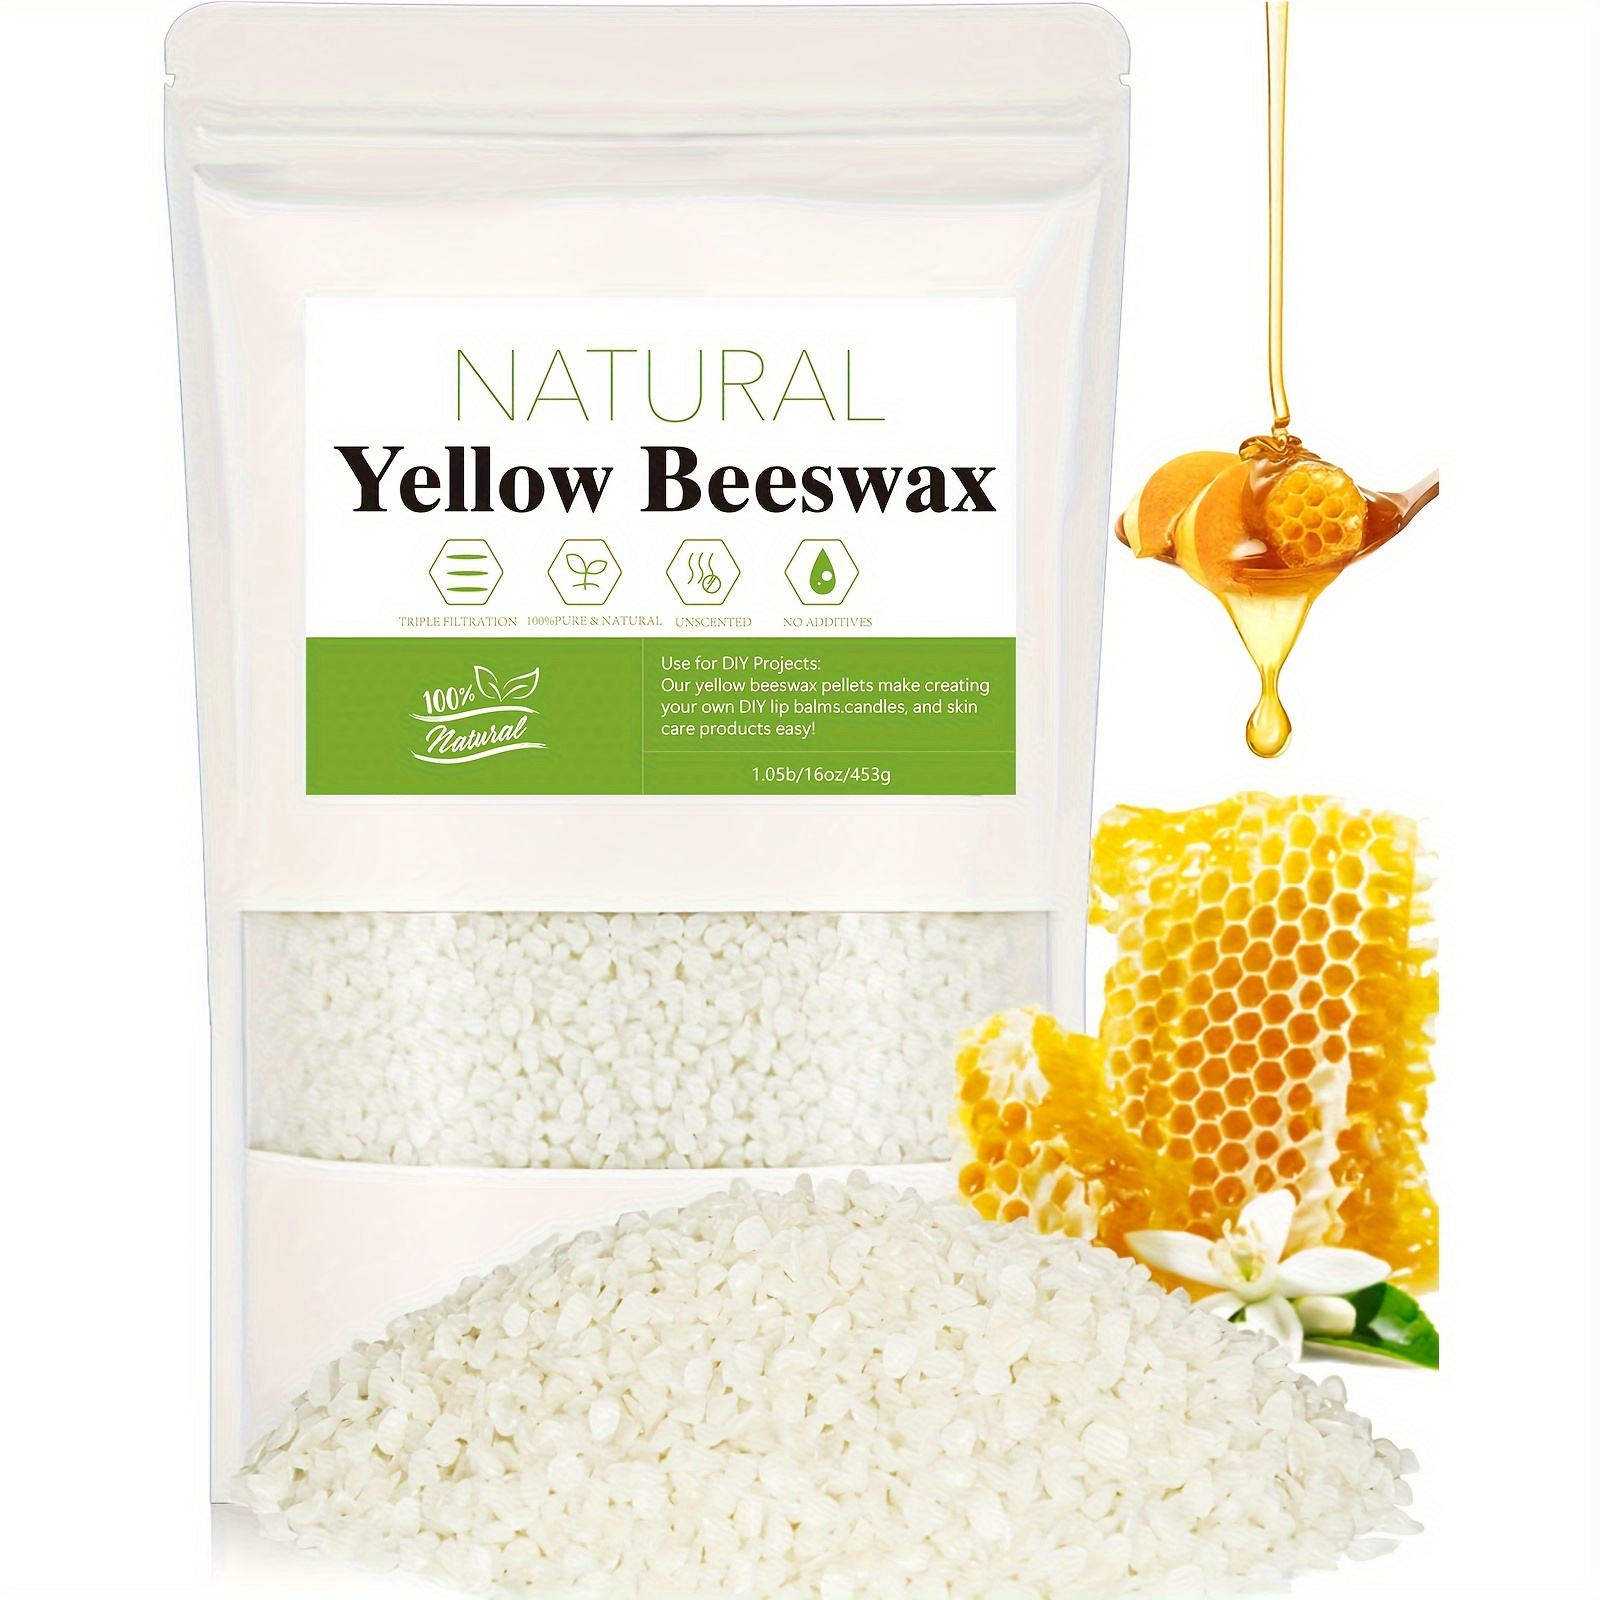 White Beeswax Pellets 16oz (1lb), Pure, Organic, Cosmetic Grade, Triple  Filtered, Great For Diy Lip Balms, Lotions, Candles & more - White Naturals